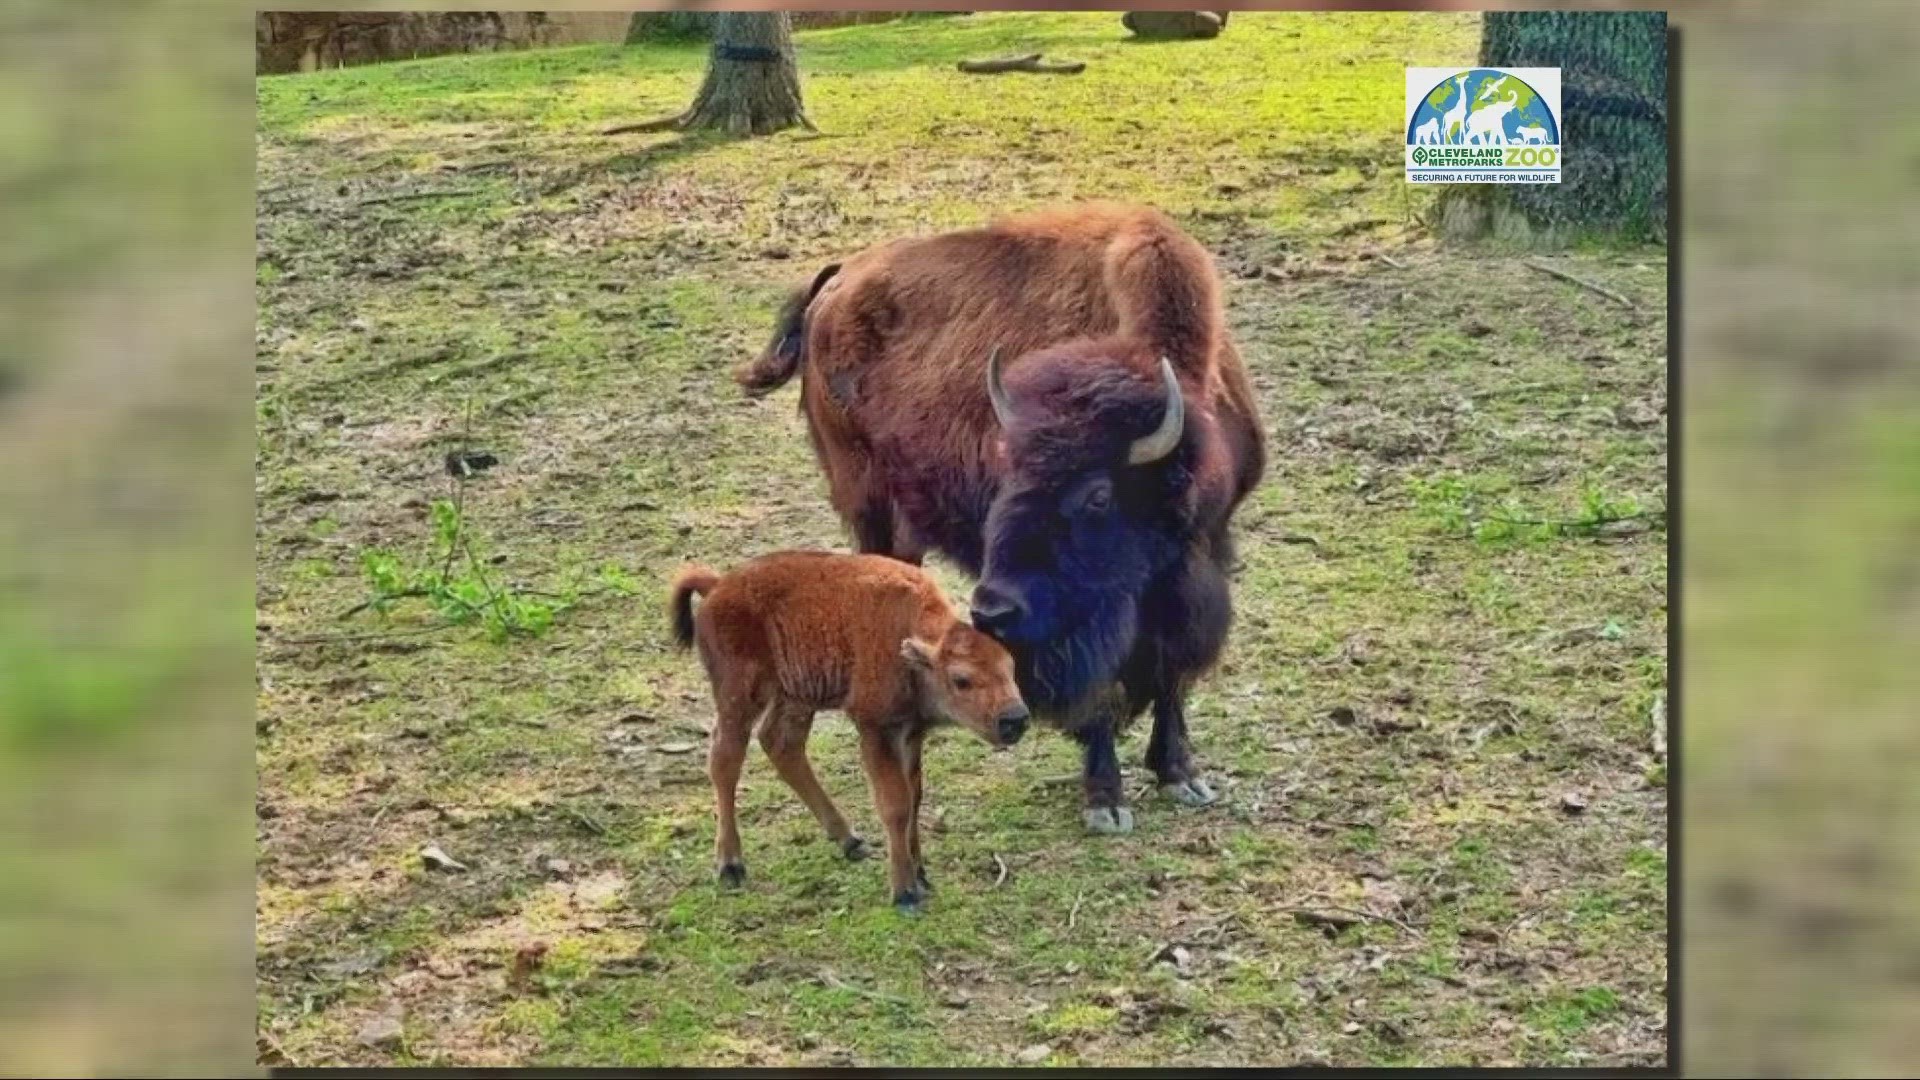 Adorable! The baby bison as standing and nursing within the first 30 minutes after the birth.